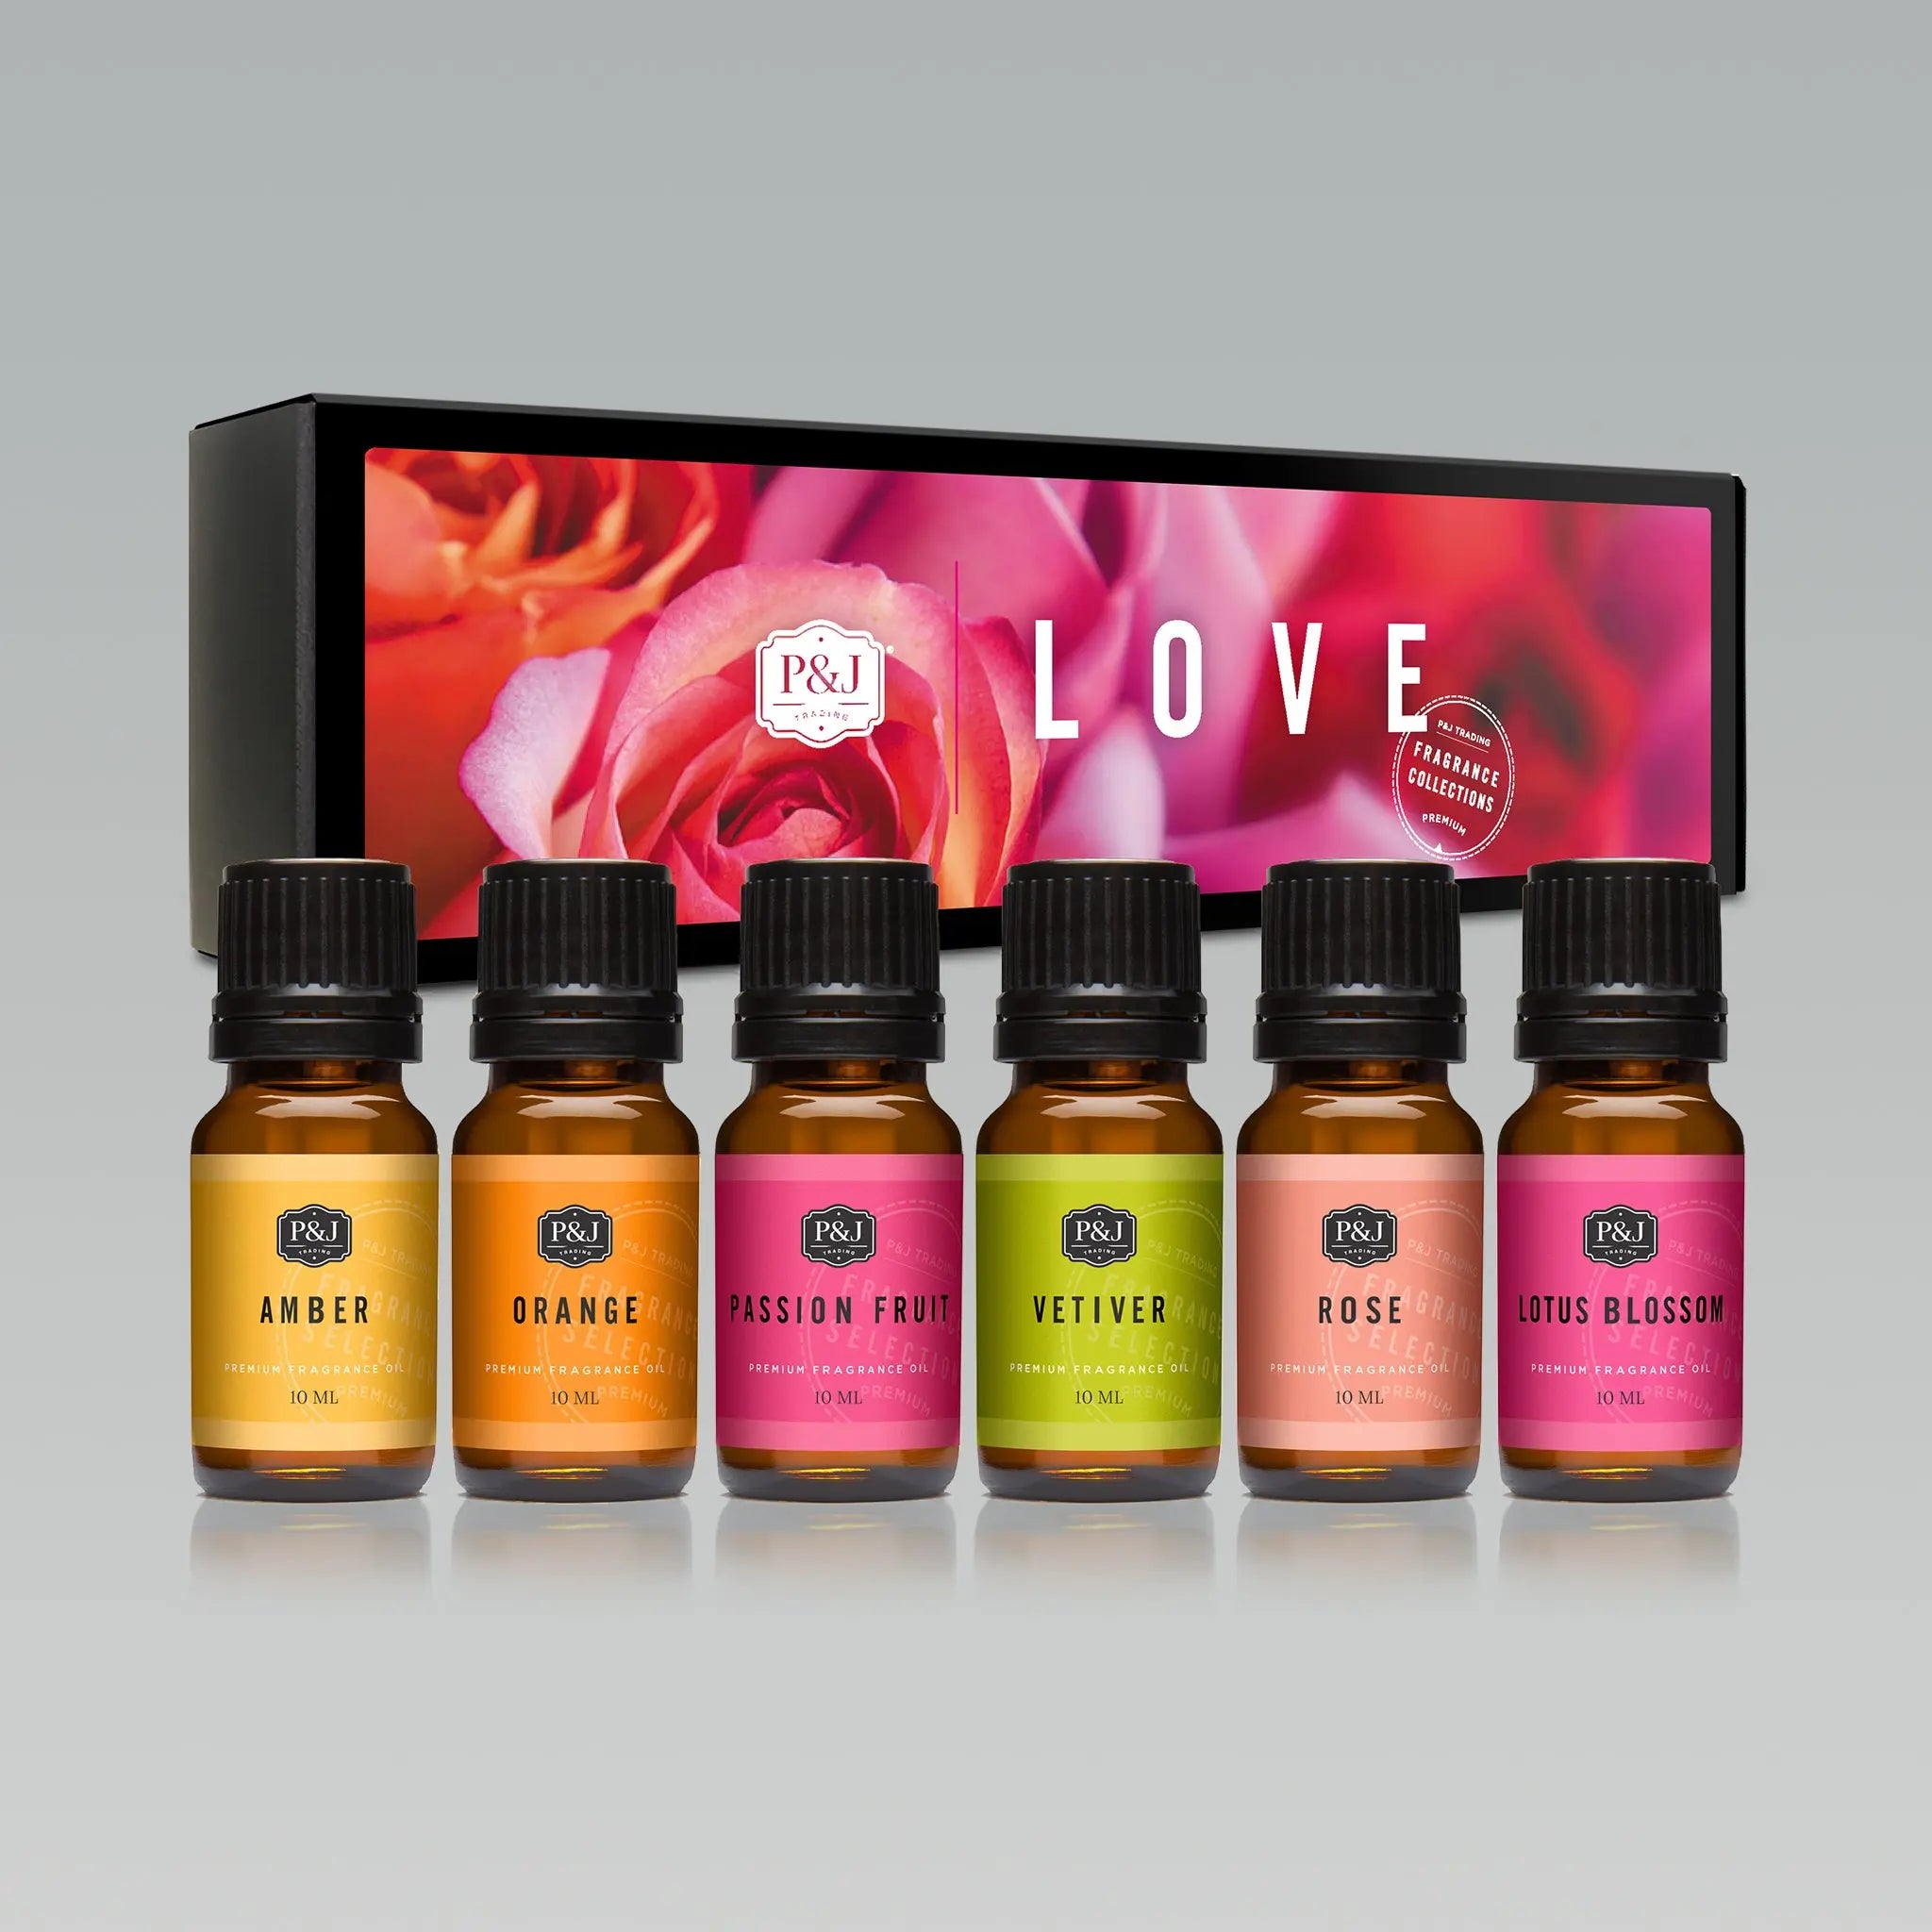 P&J fragrance oil? Anyone else used it? I've tried 2 different